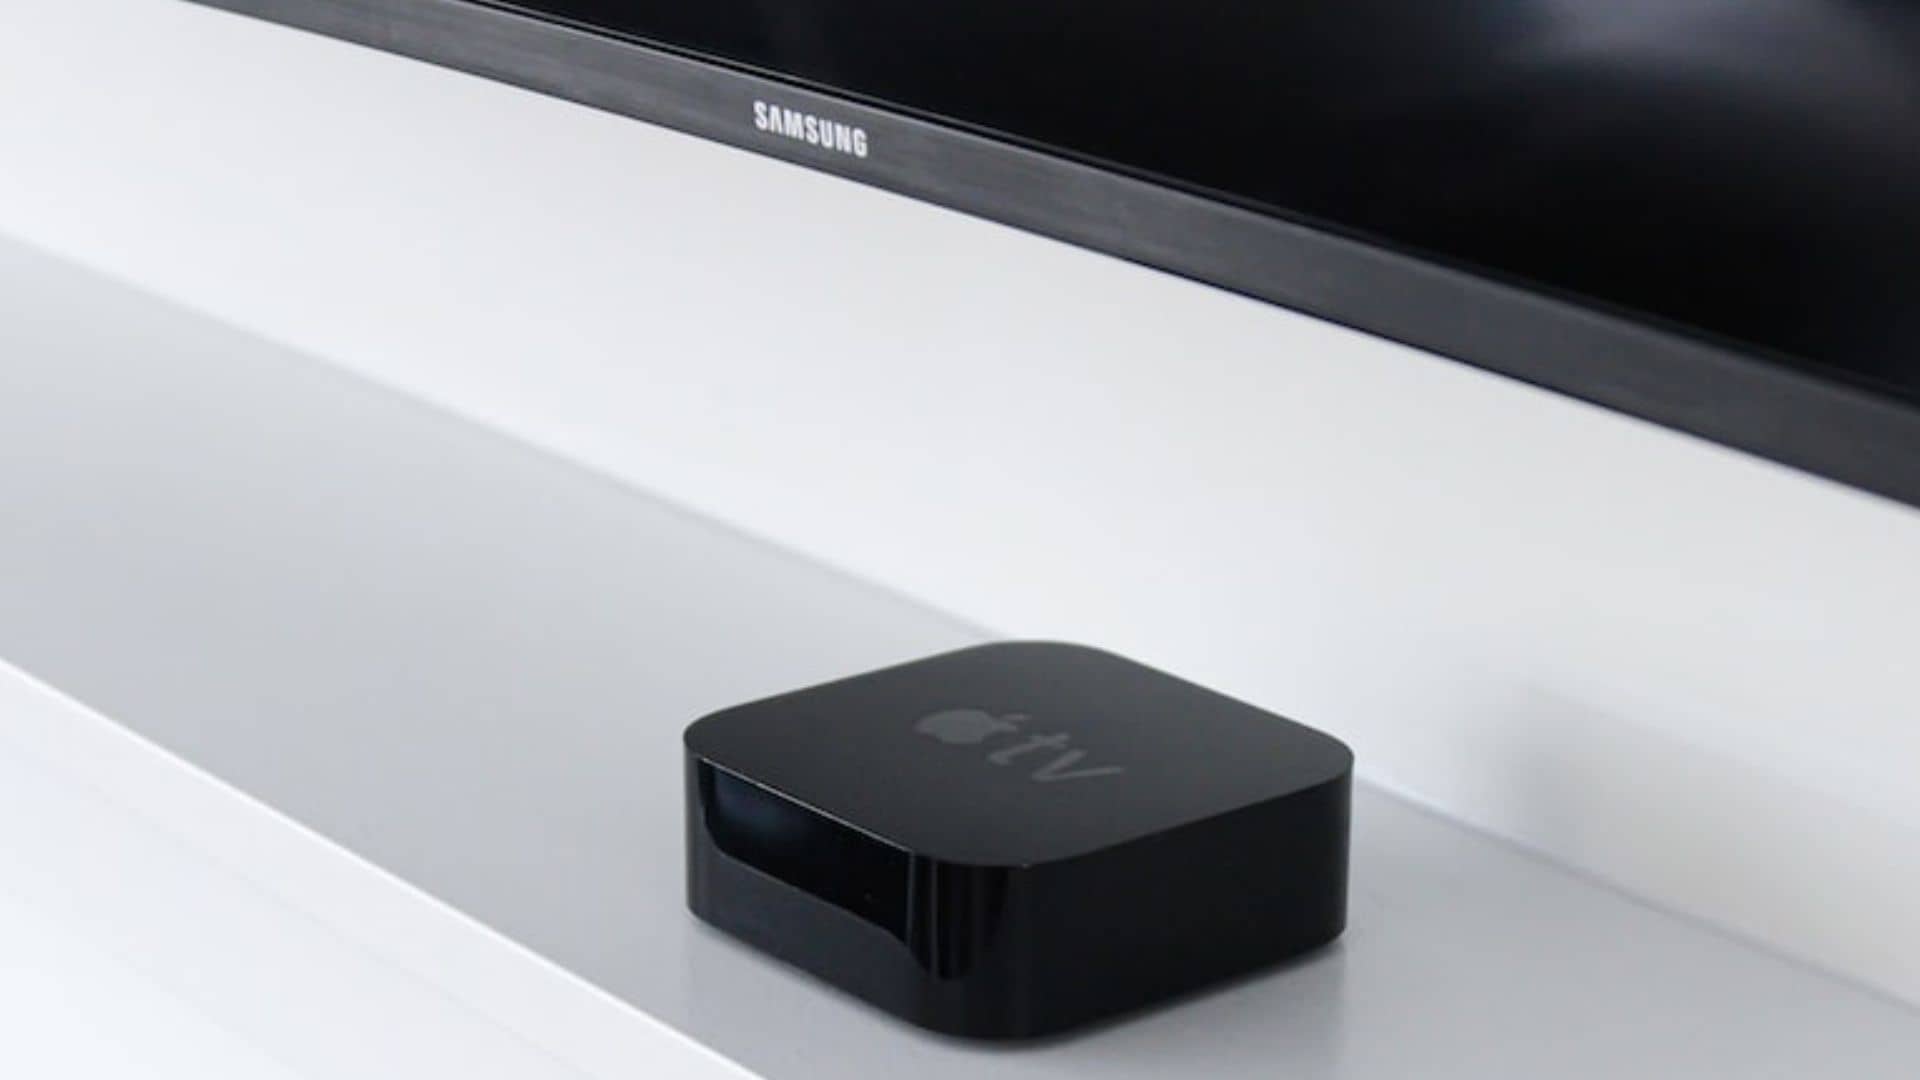 why the Apple TV streaming device is not recognized on Samsung TV